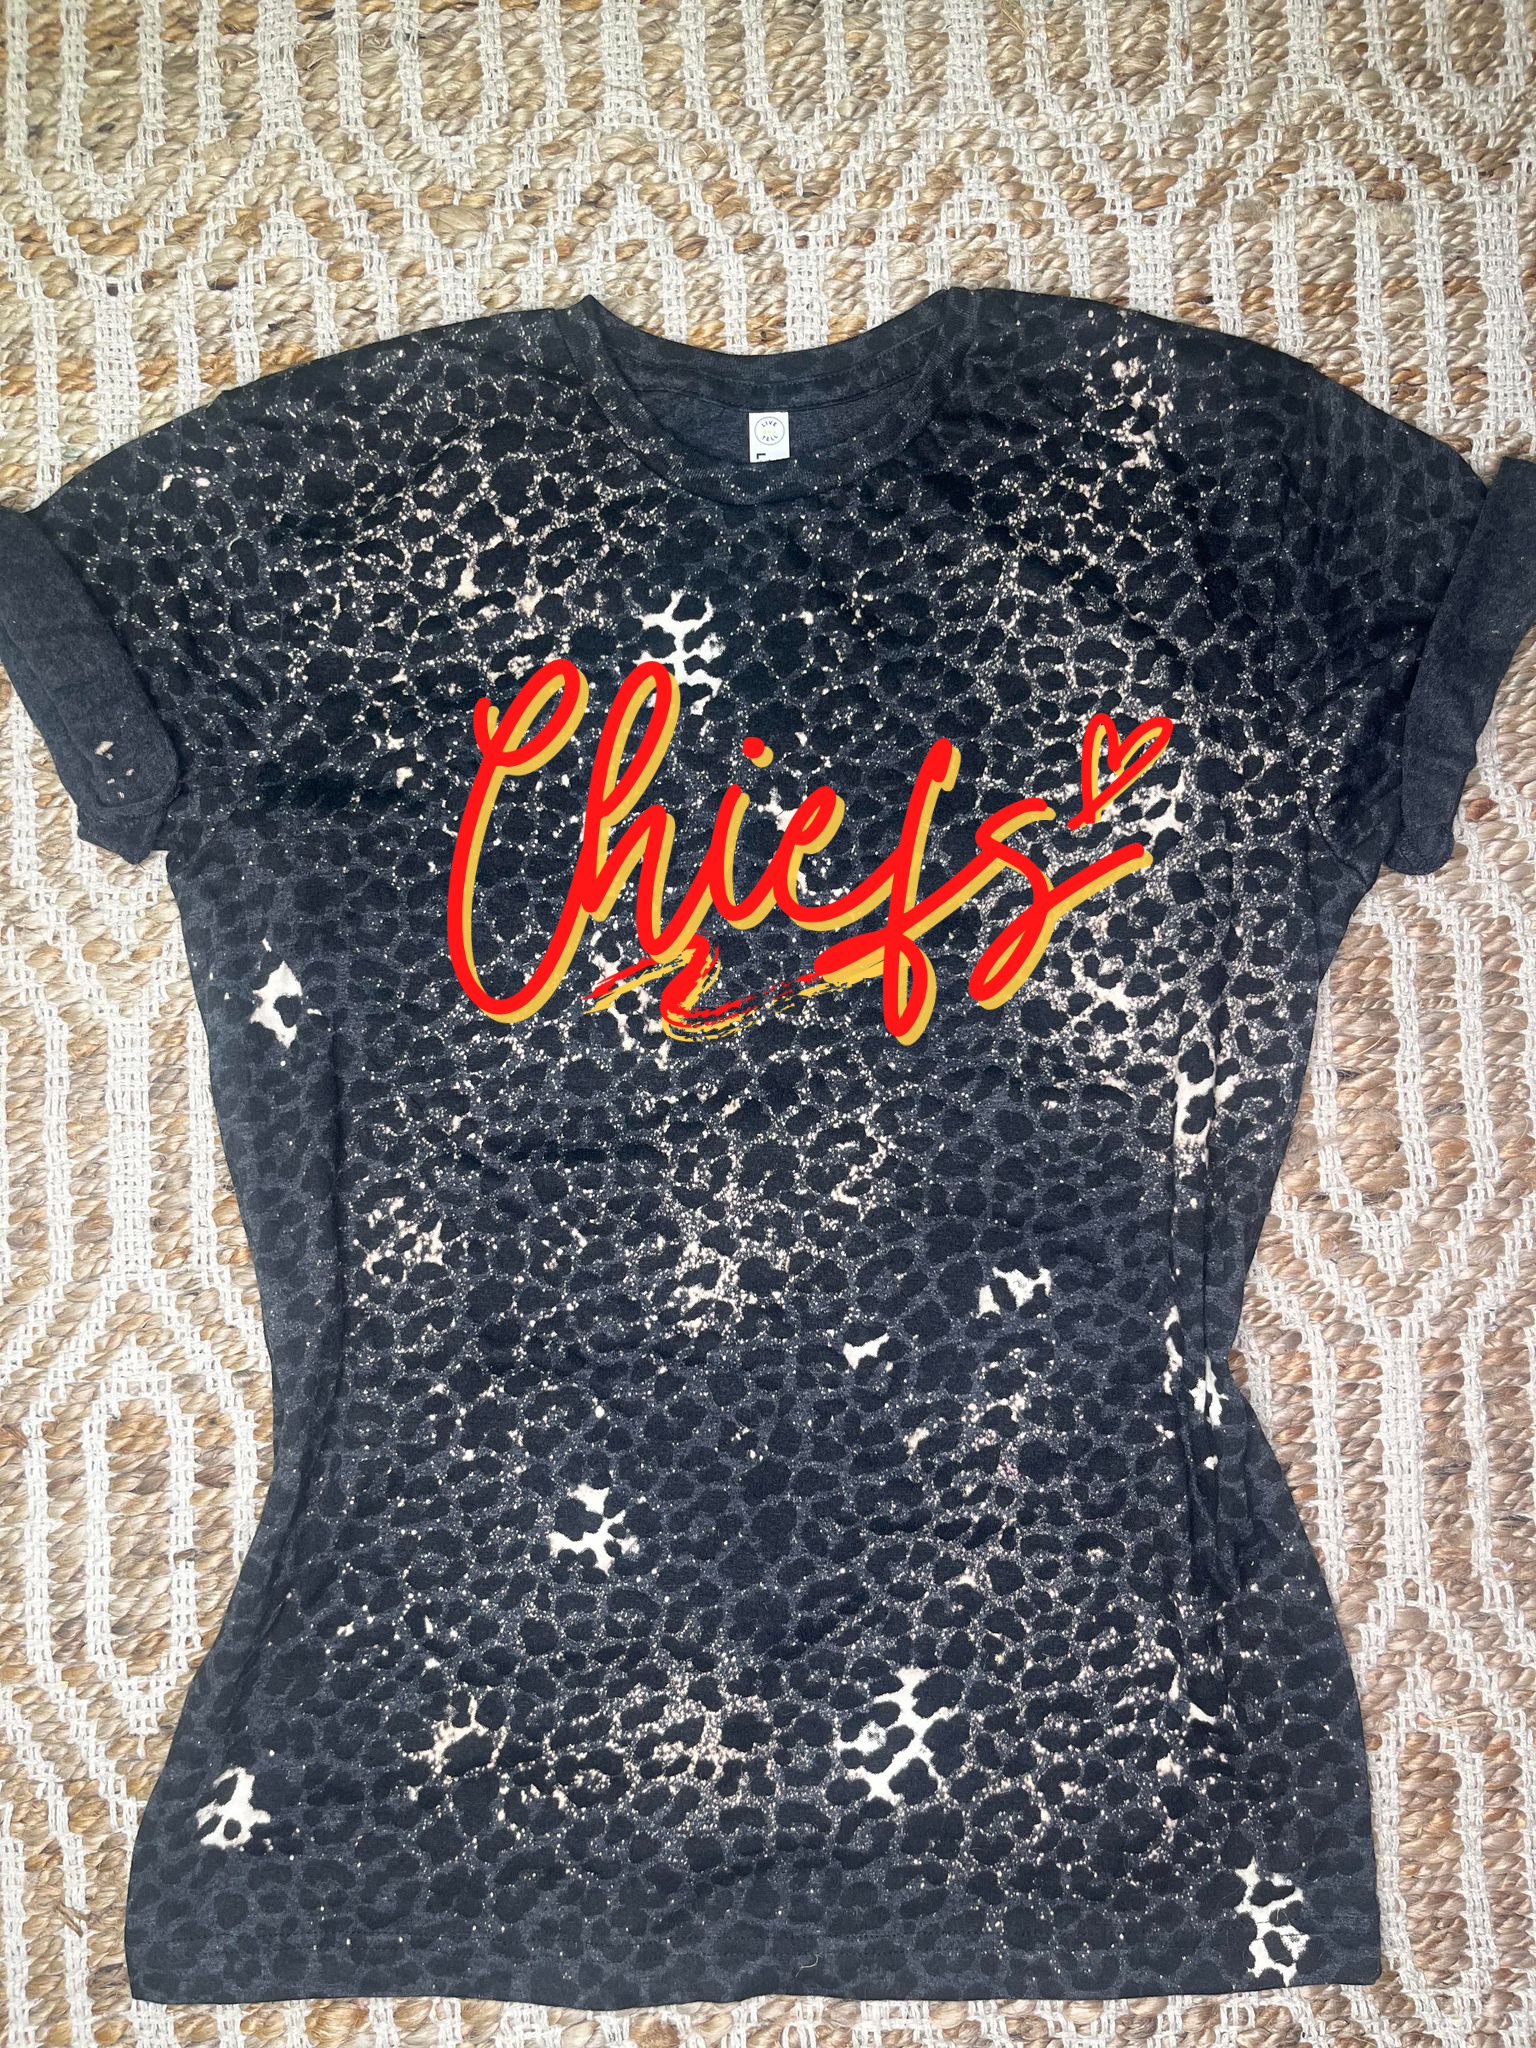 **PREORDER** C H I E F S Bleached Leopard Tee